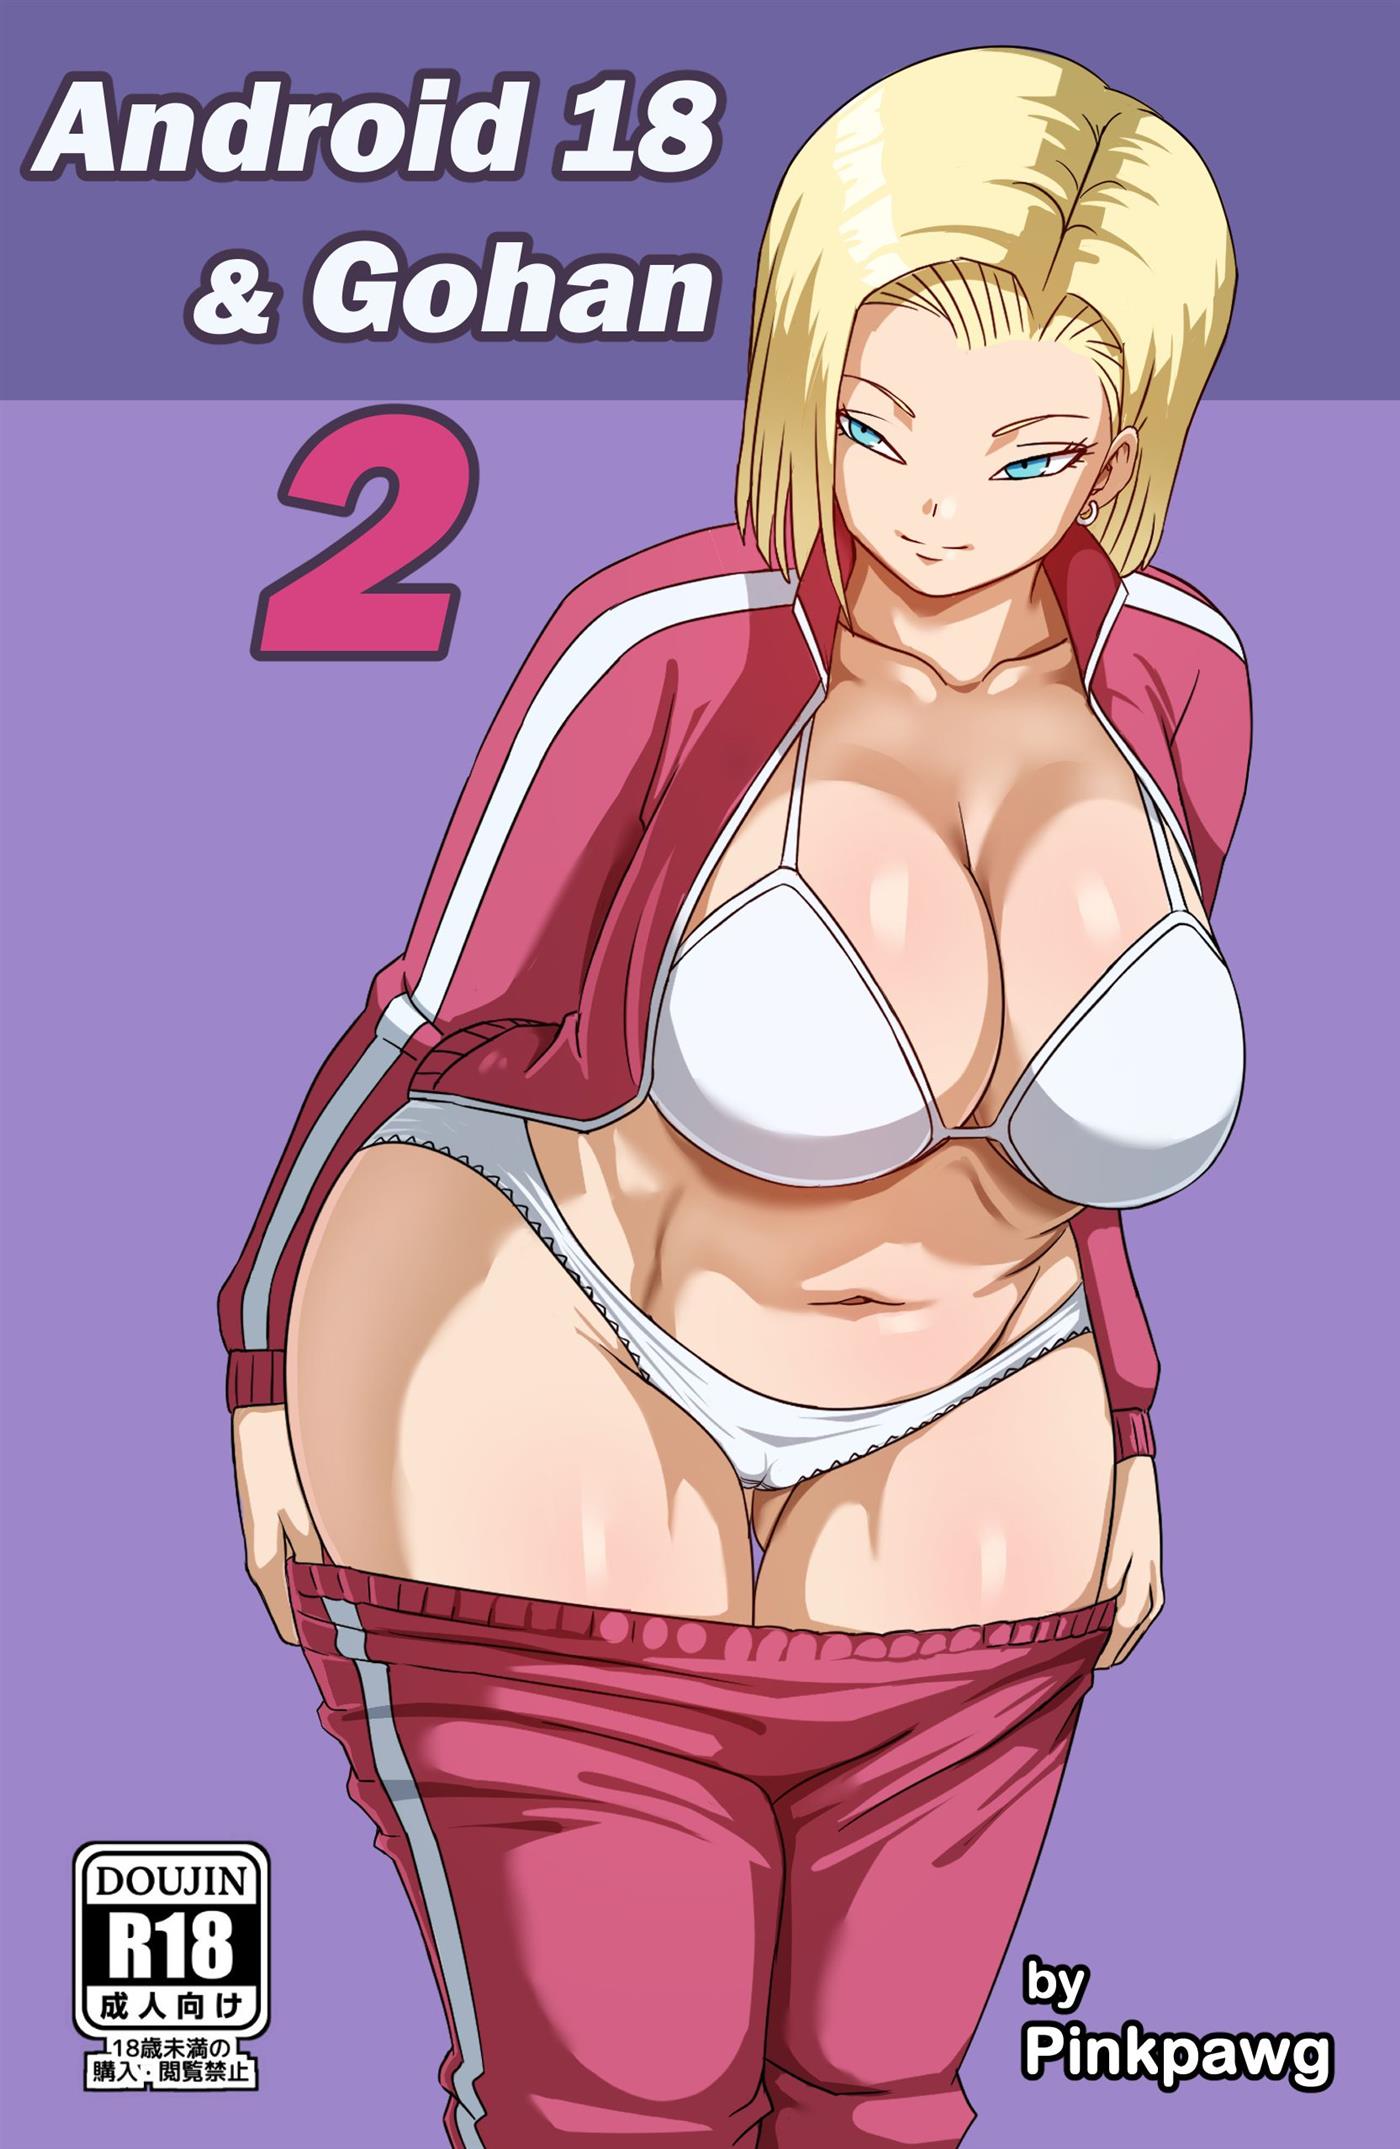 Android 18 hentai hq